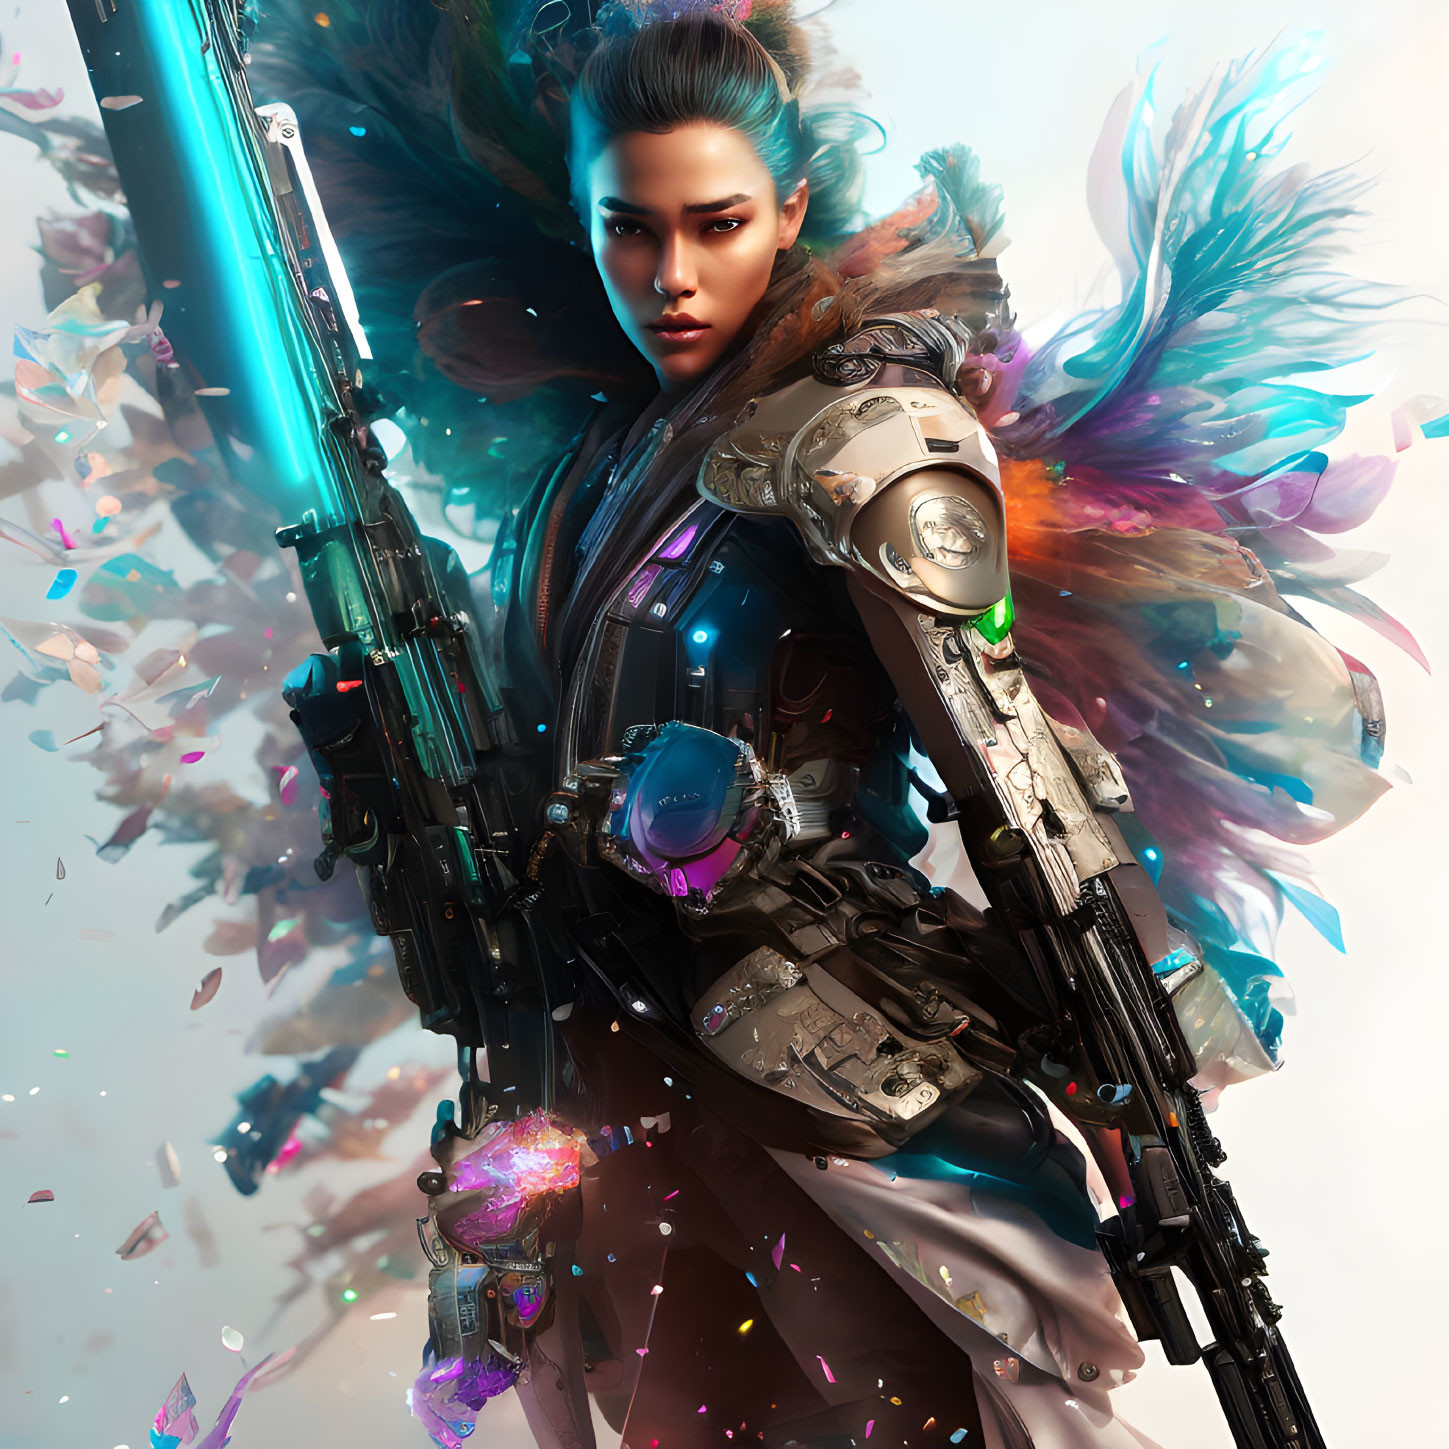 Futuristic warrior woman with glowing blue sword and high-tech armor surrounded by floating colorful shards and feathers